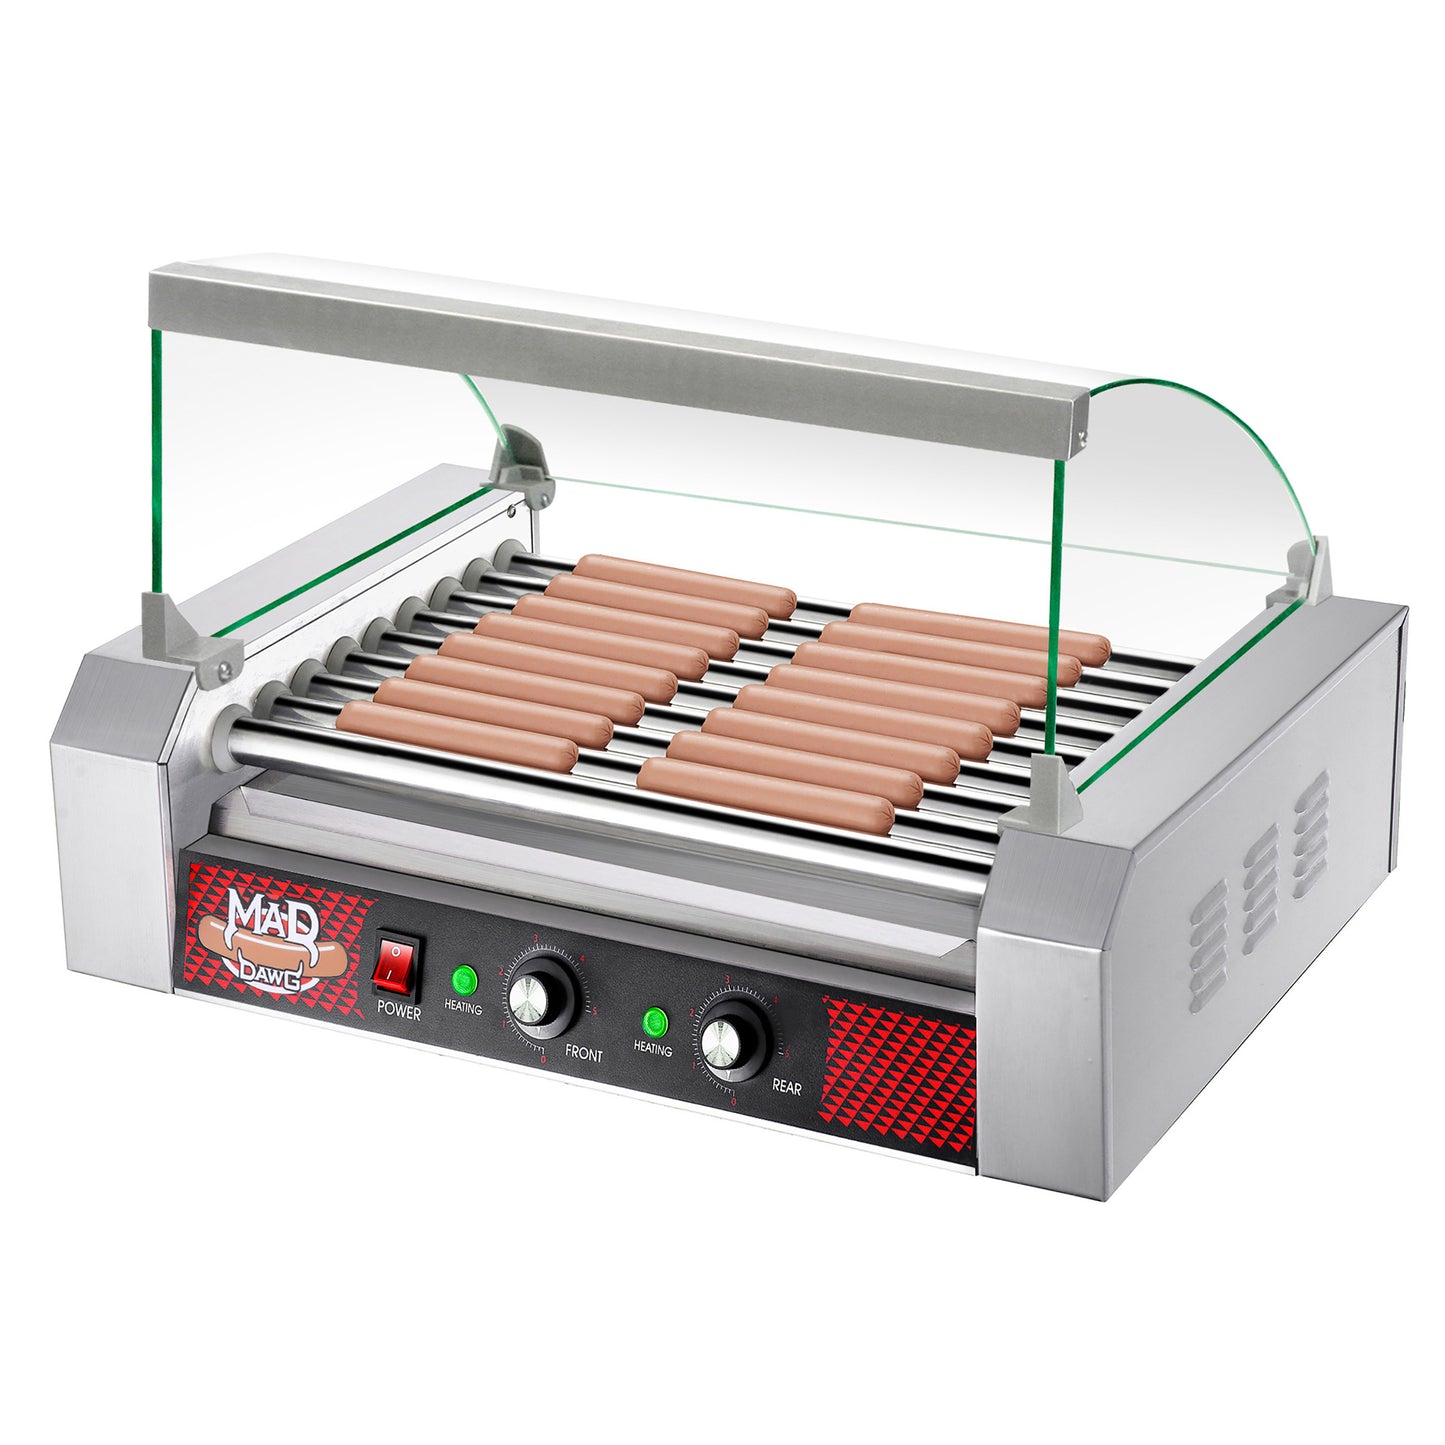 24 Hot Dog 9 Roll Hot Dog Machine with Tempered Glass Cover